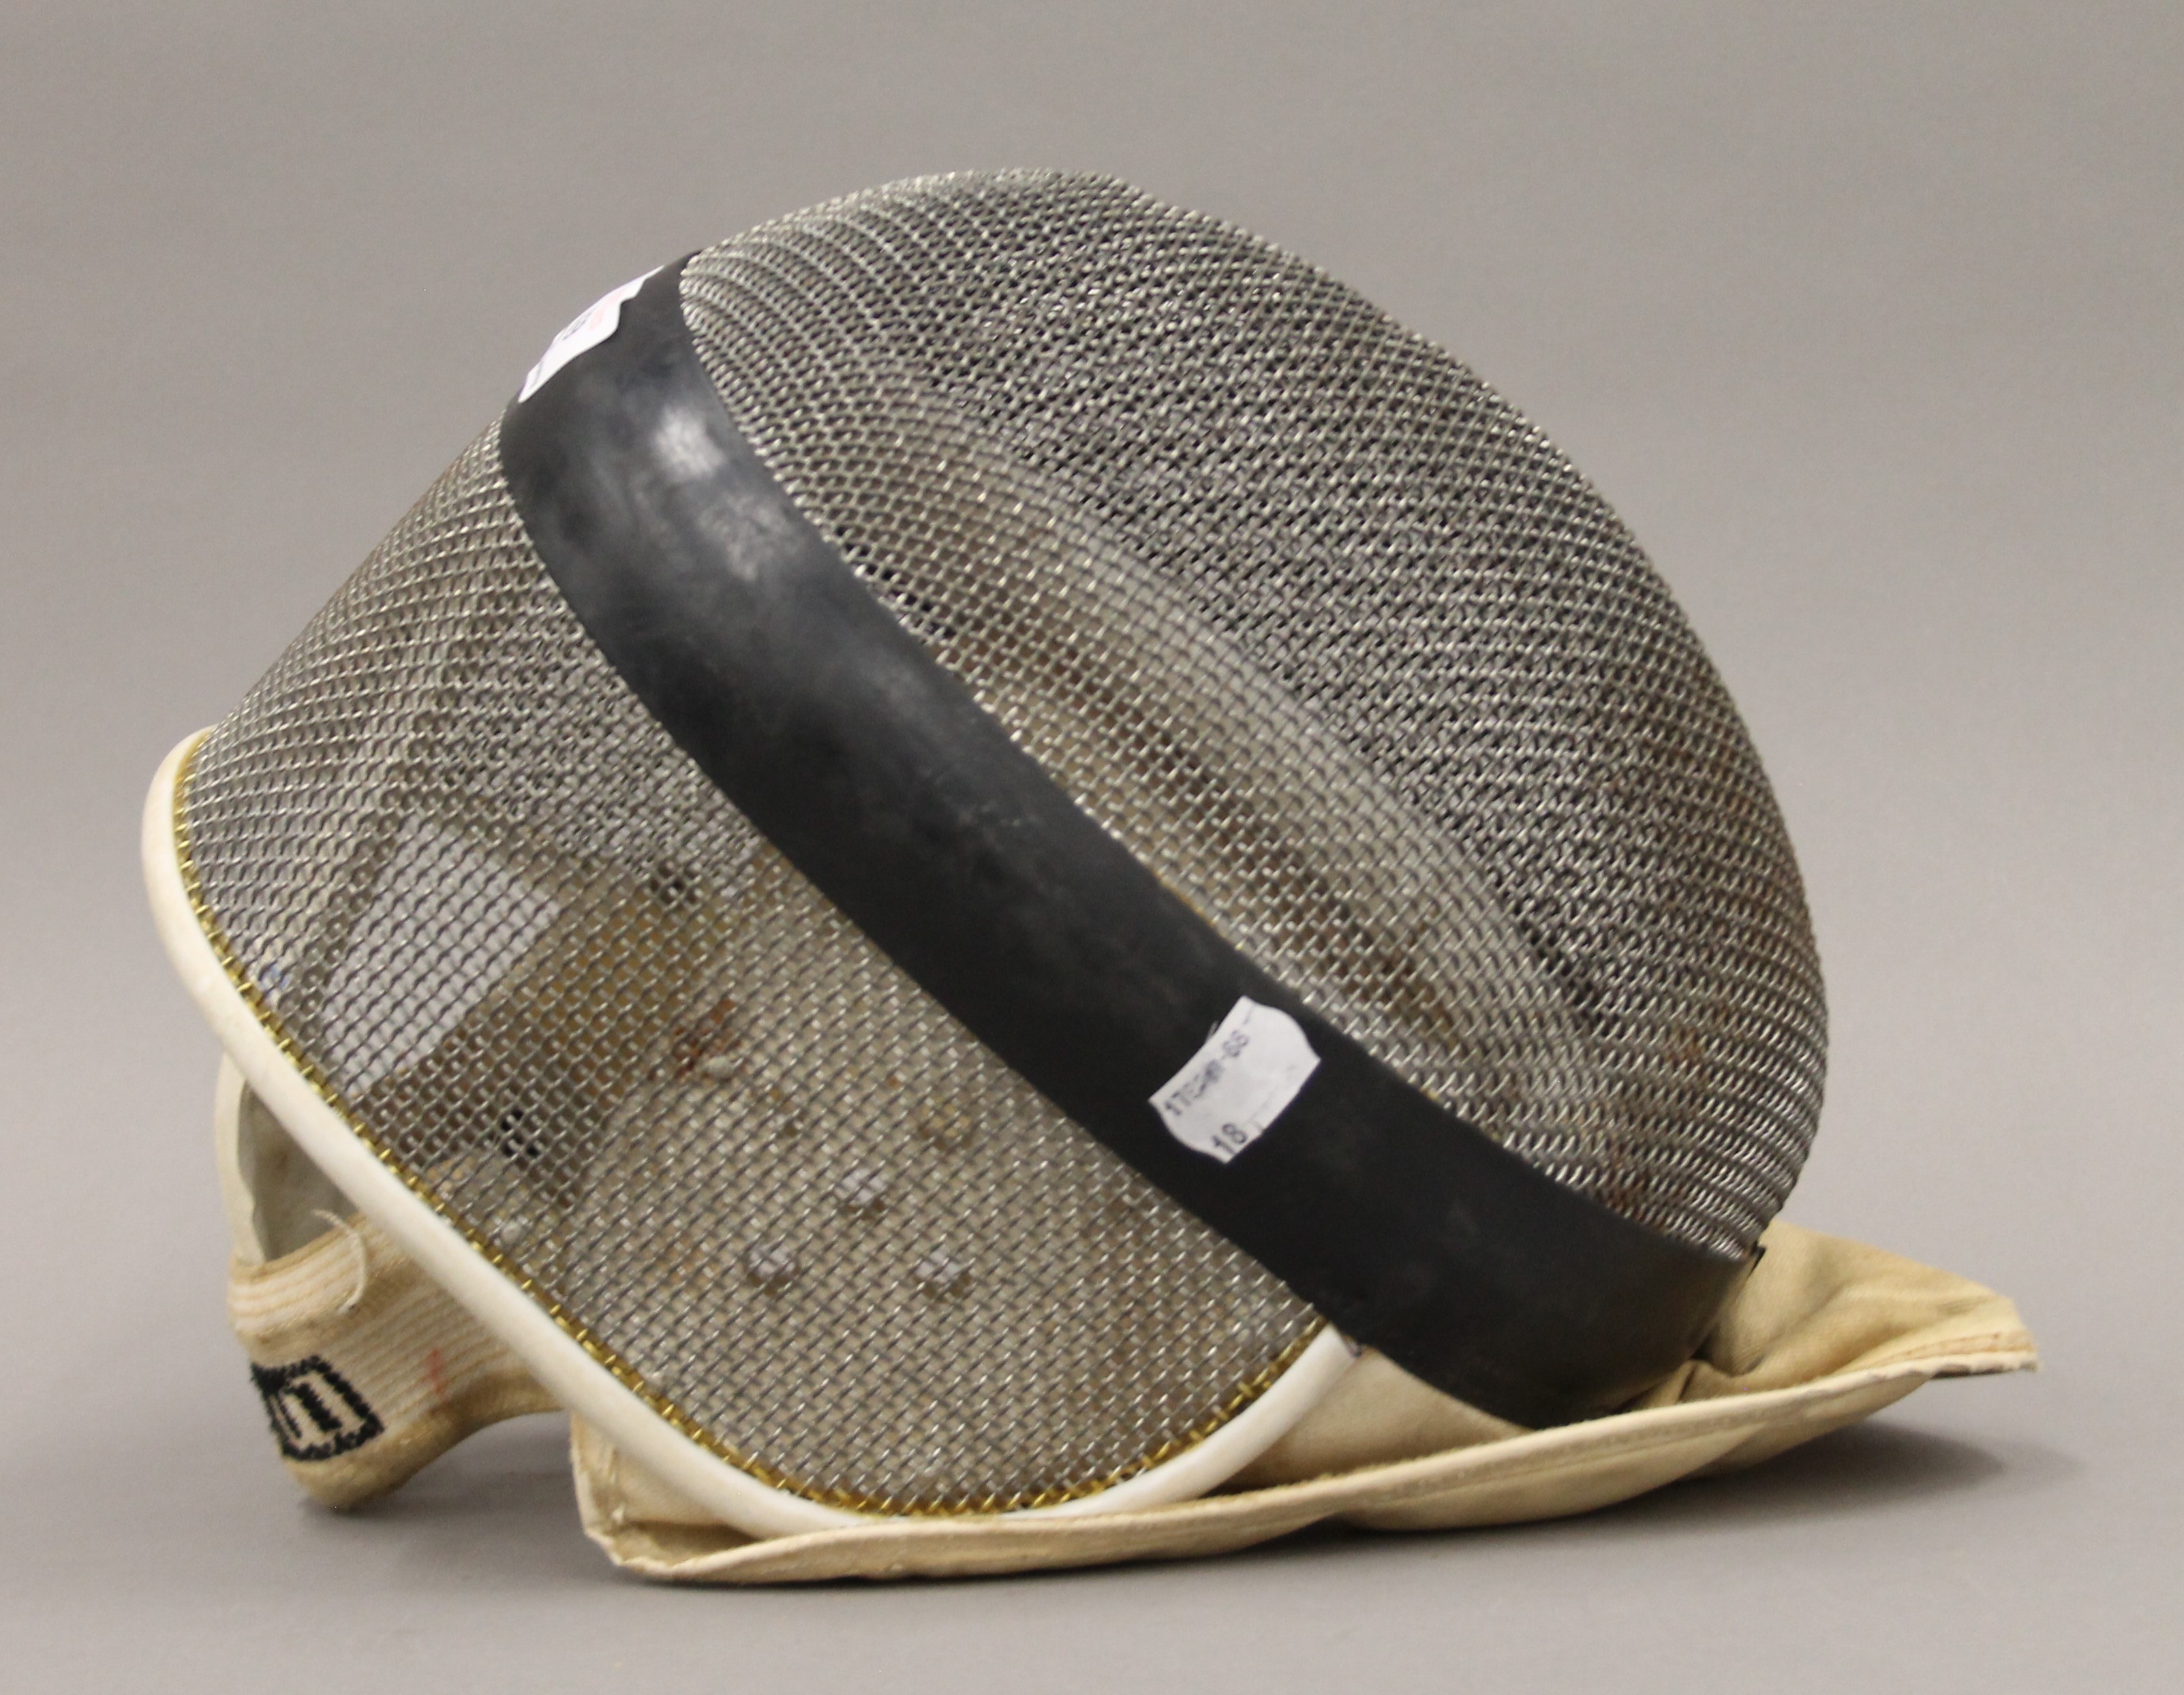 A Leon Paul fencing mask. - Image 2 of 3